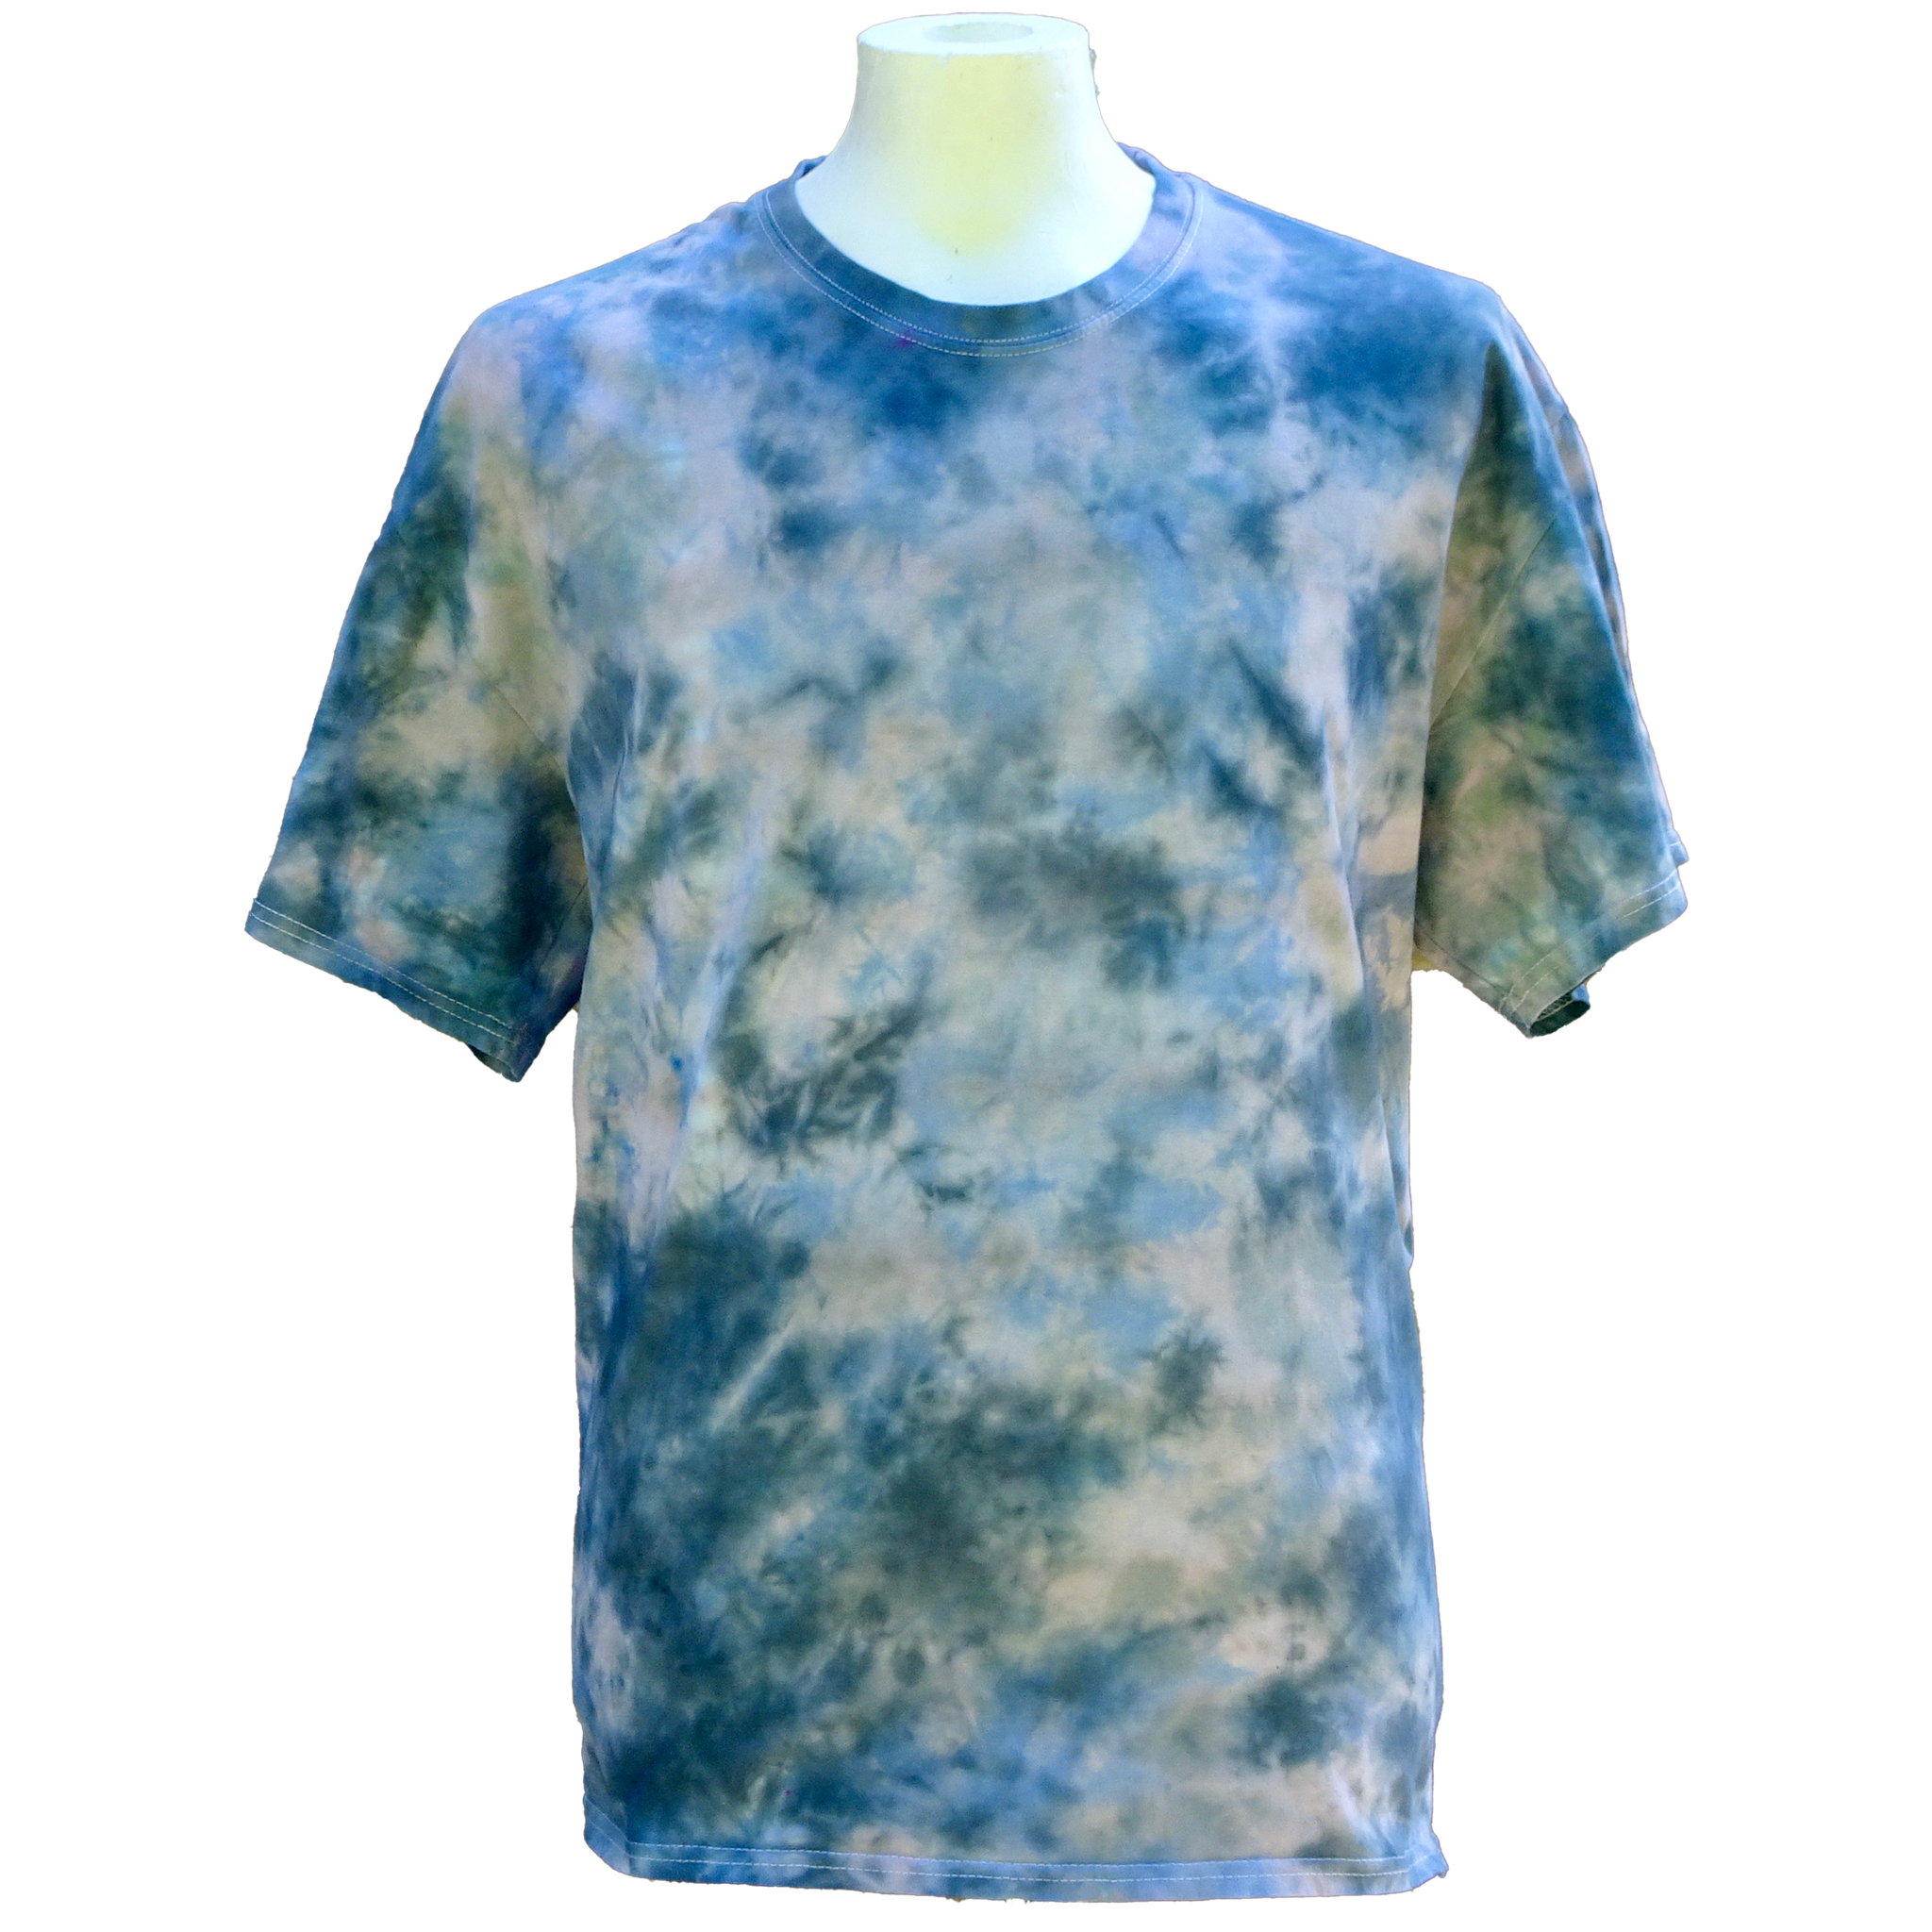 Tie-dye T-shirt Adult Extra Large